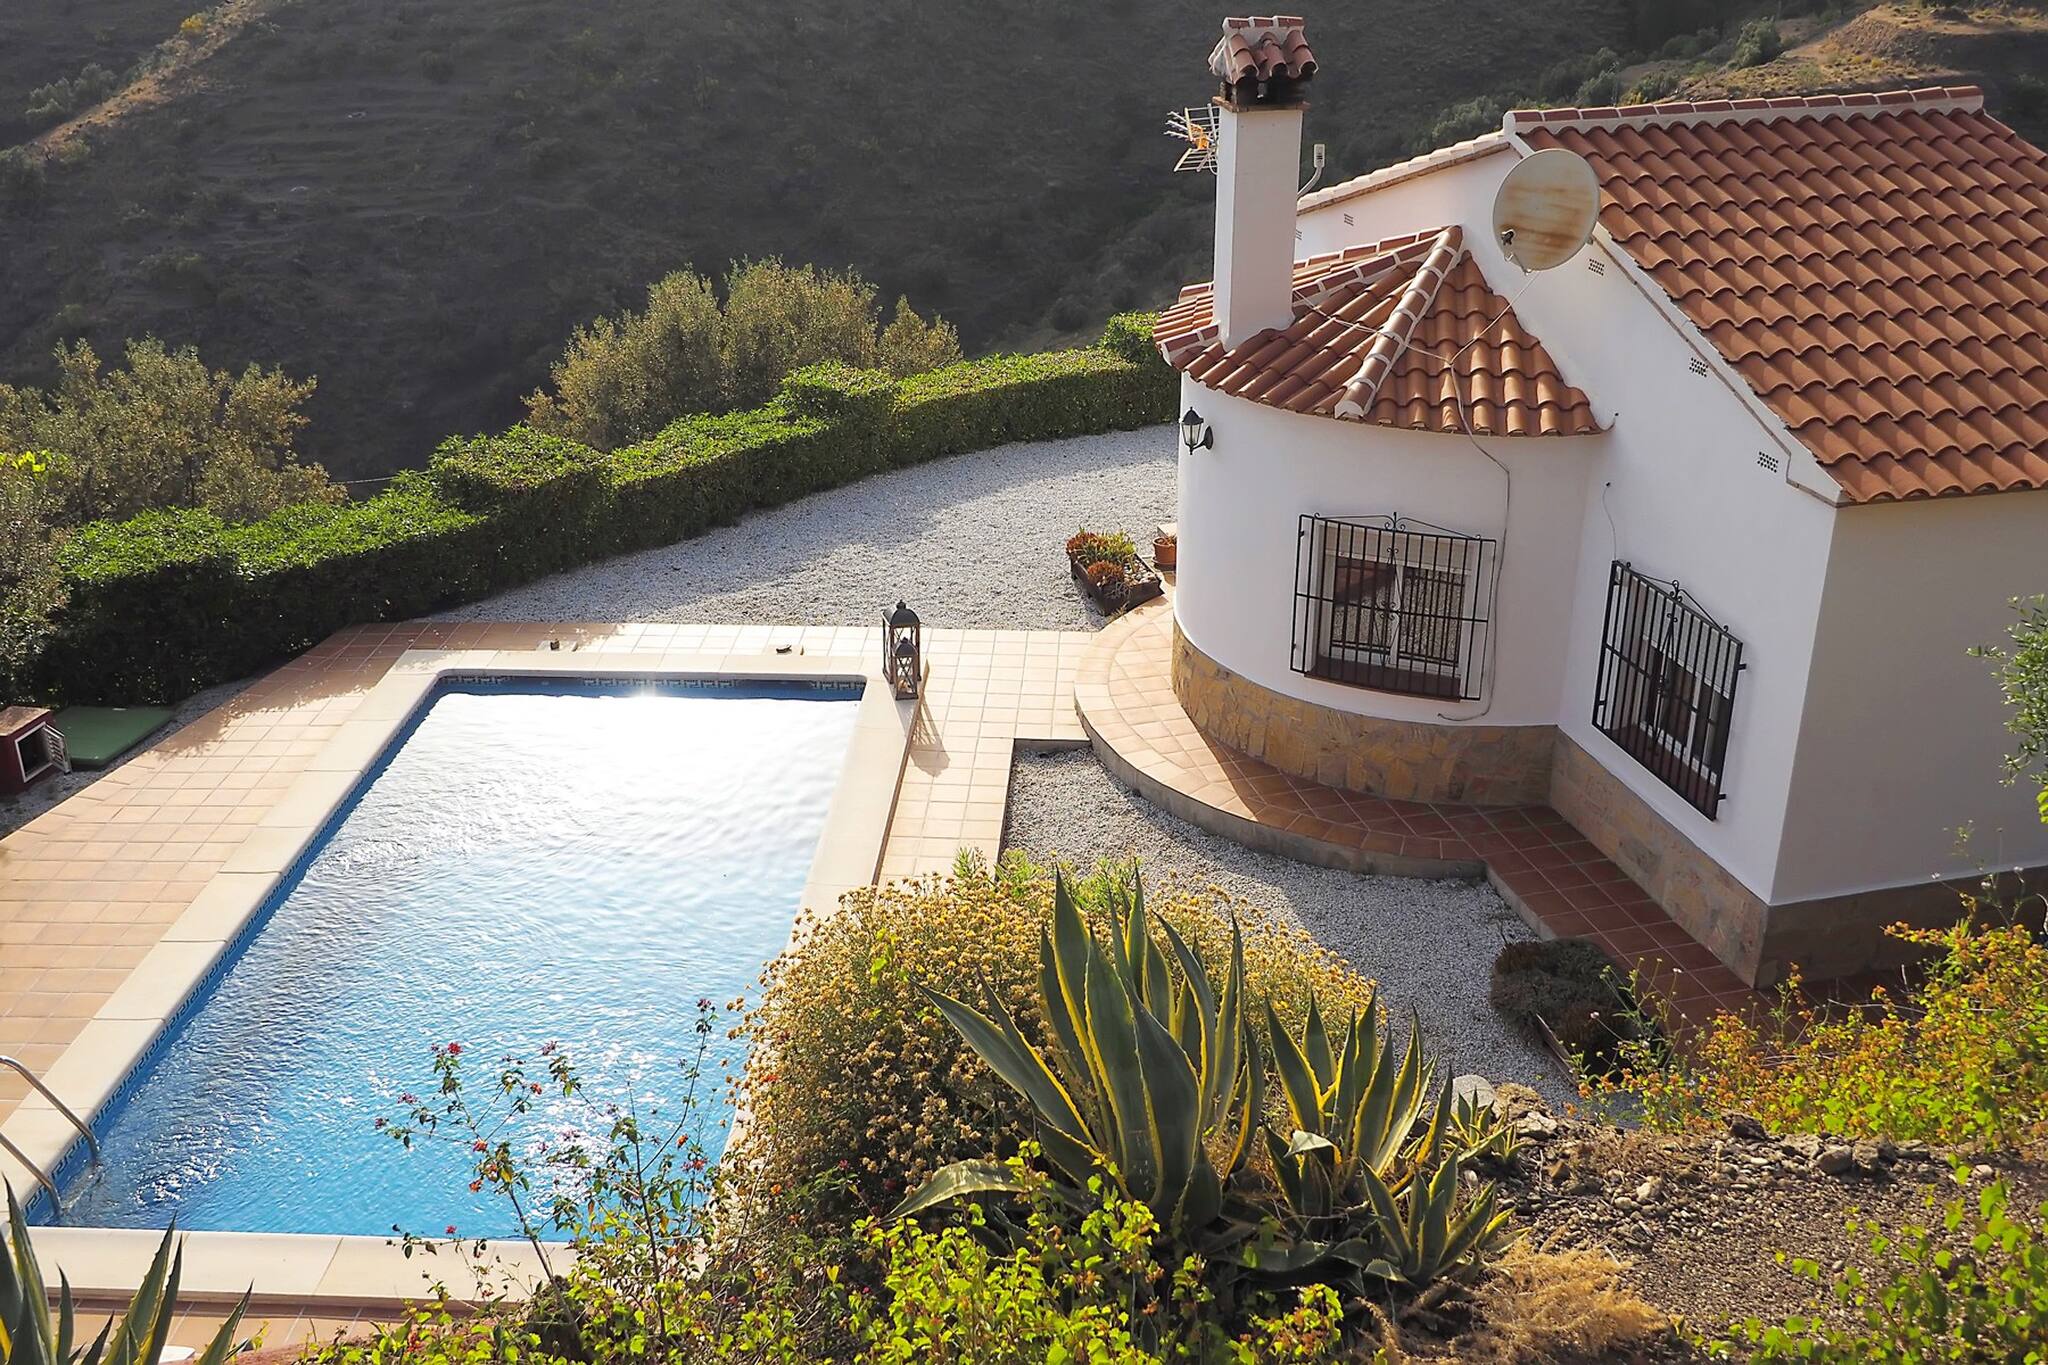 Fantastic Finca for 2-5 Persons With Private Pool, near the village of Sayalonga, east of Malaga